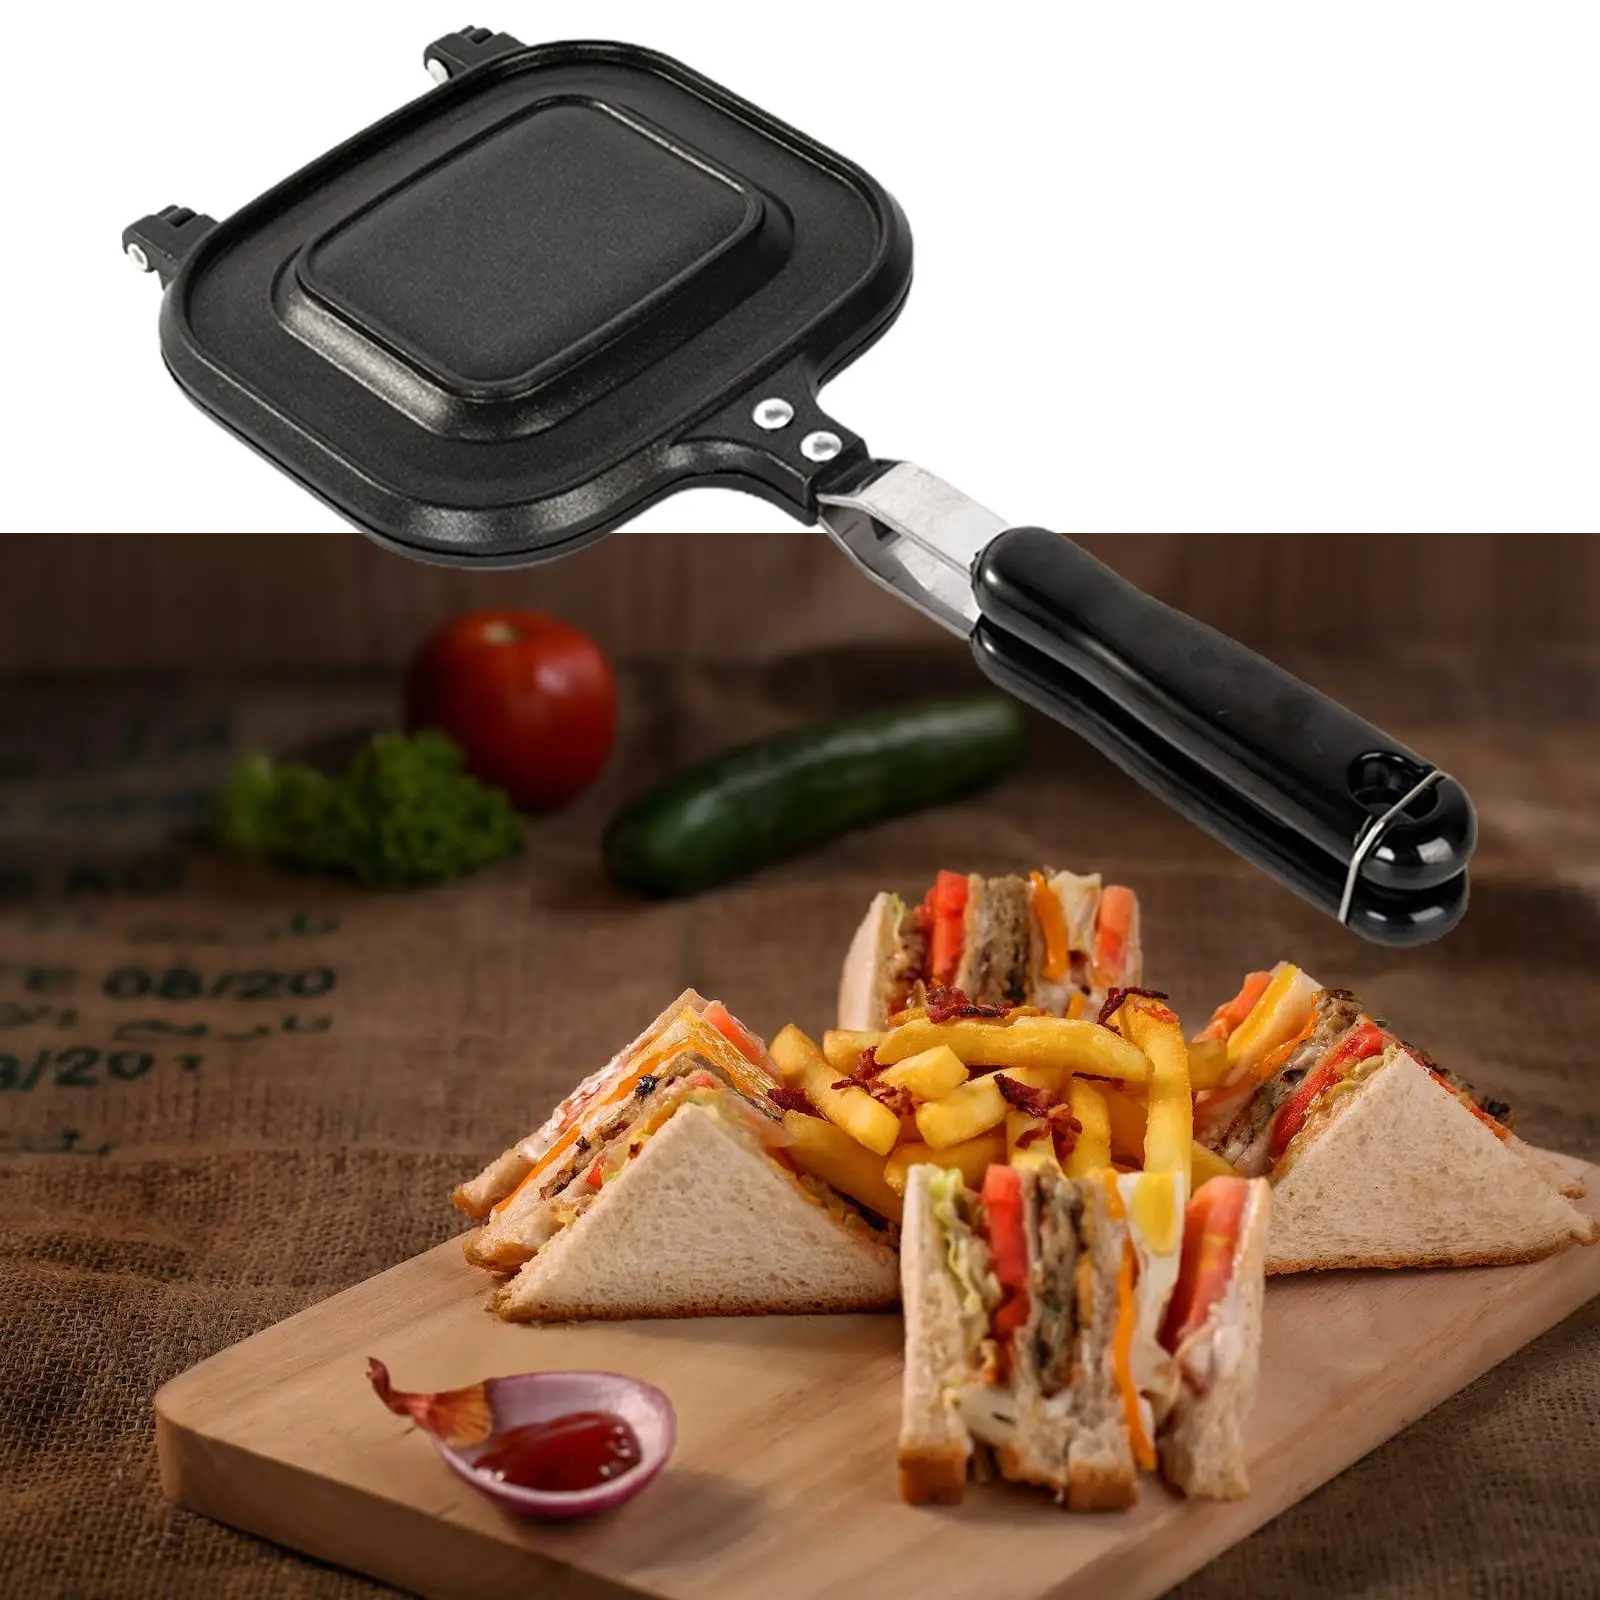 Bread Toast Maker Double Sided for Induction Cooker Indoors and Outdoors